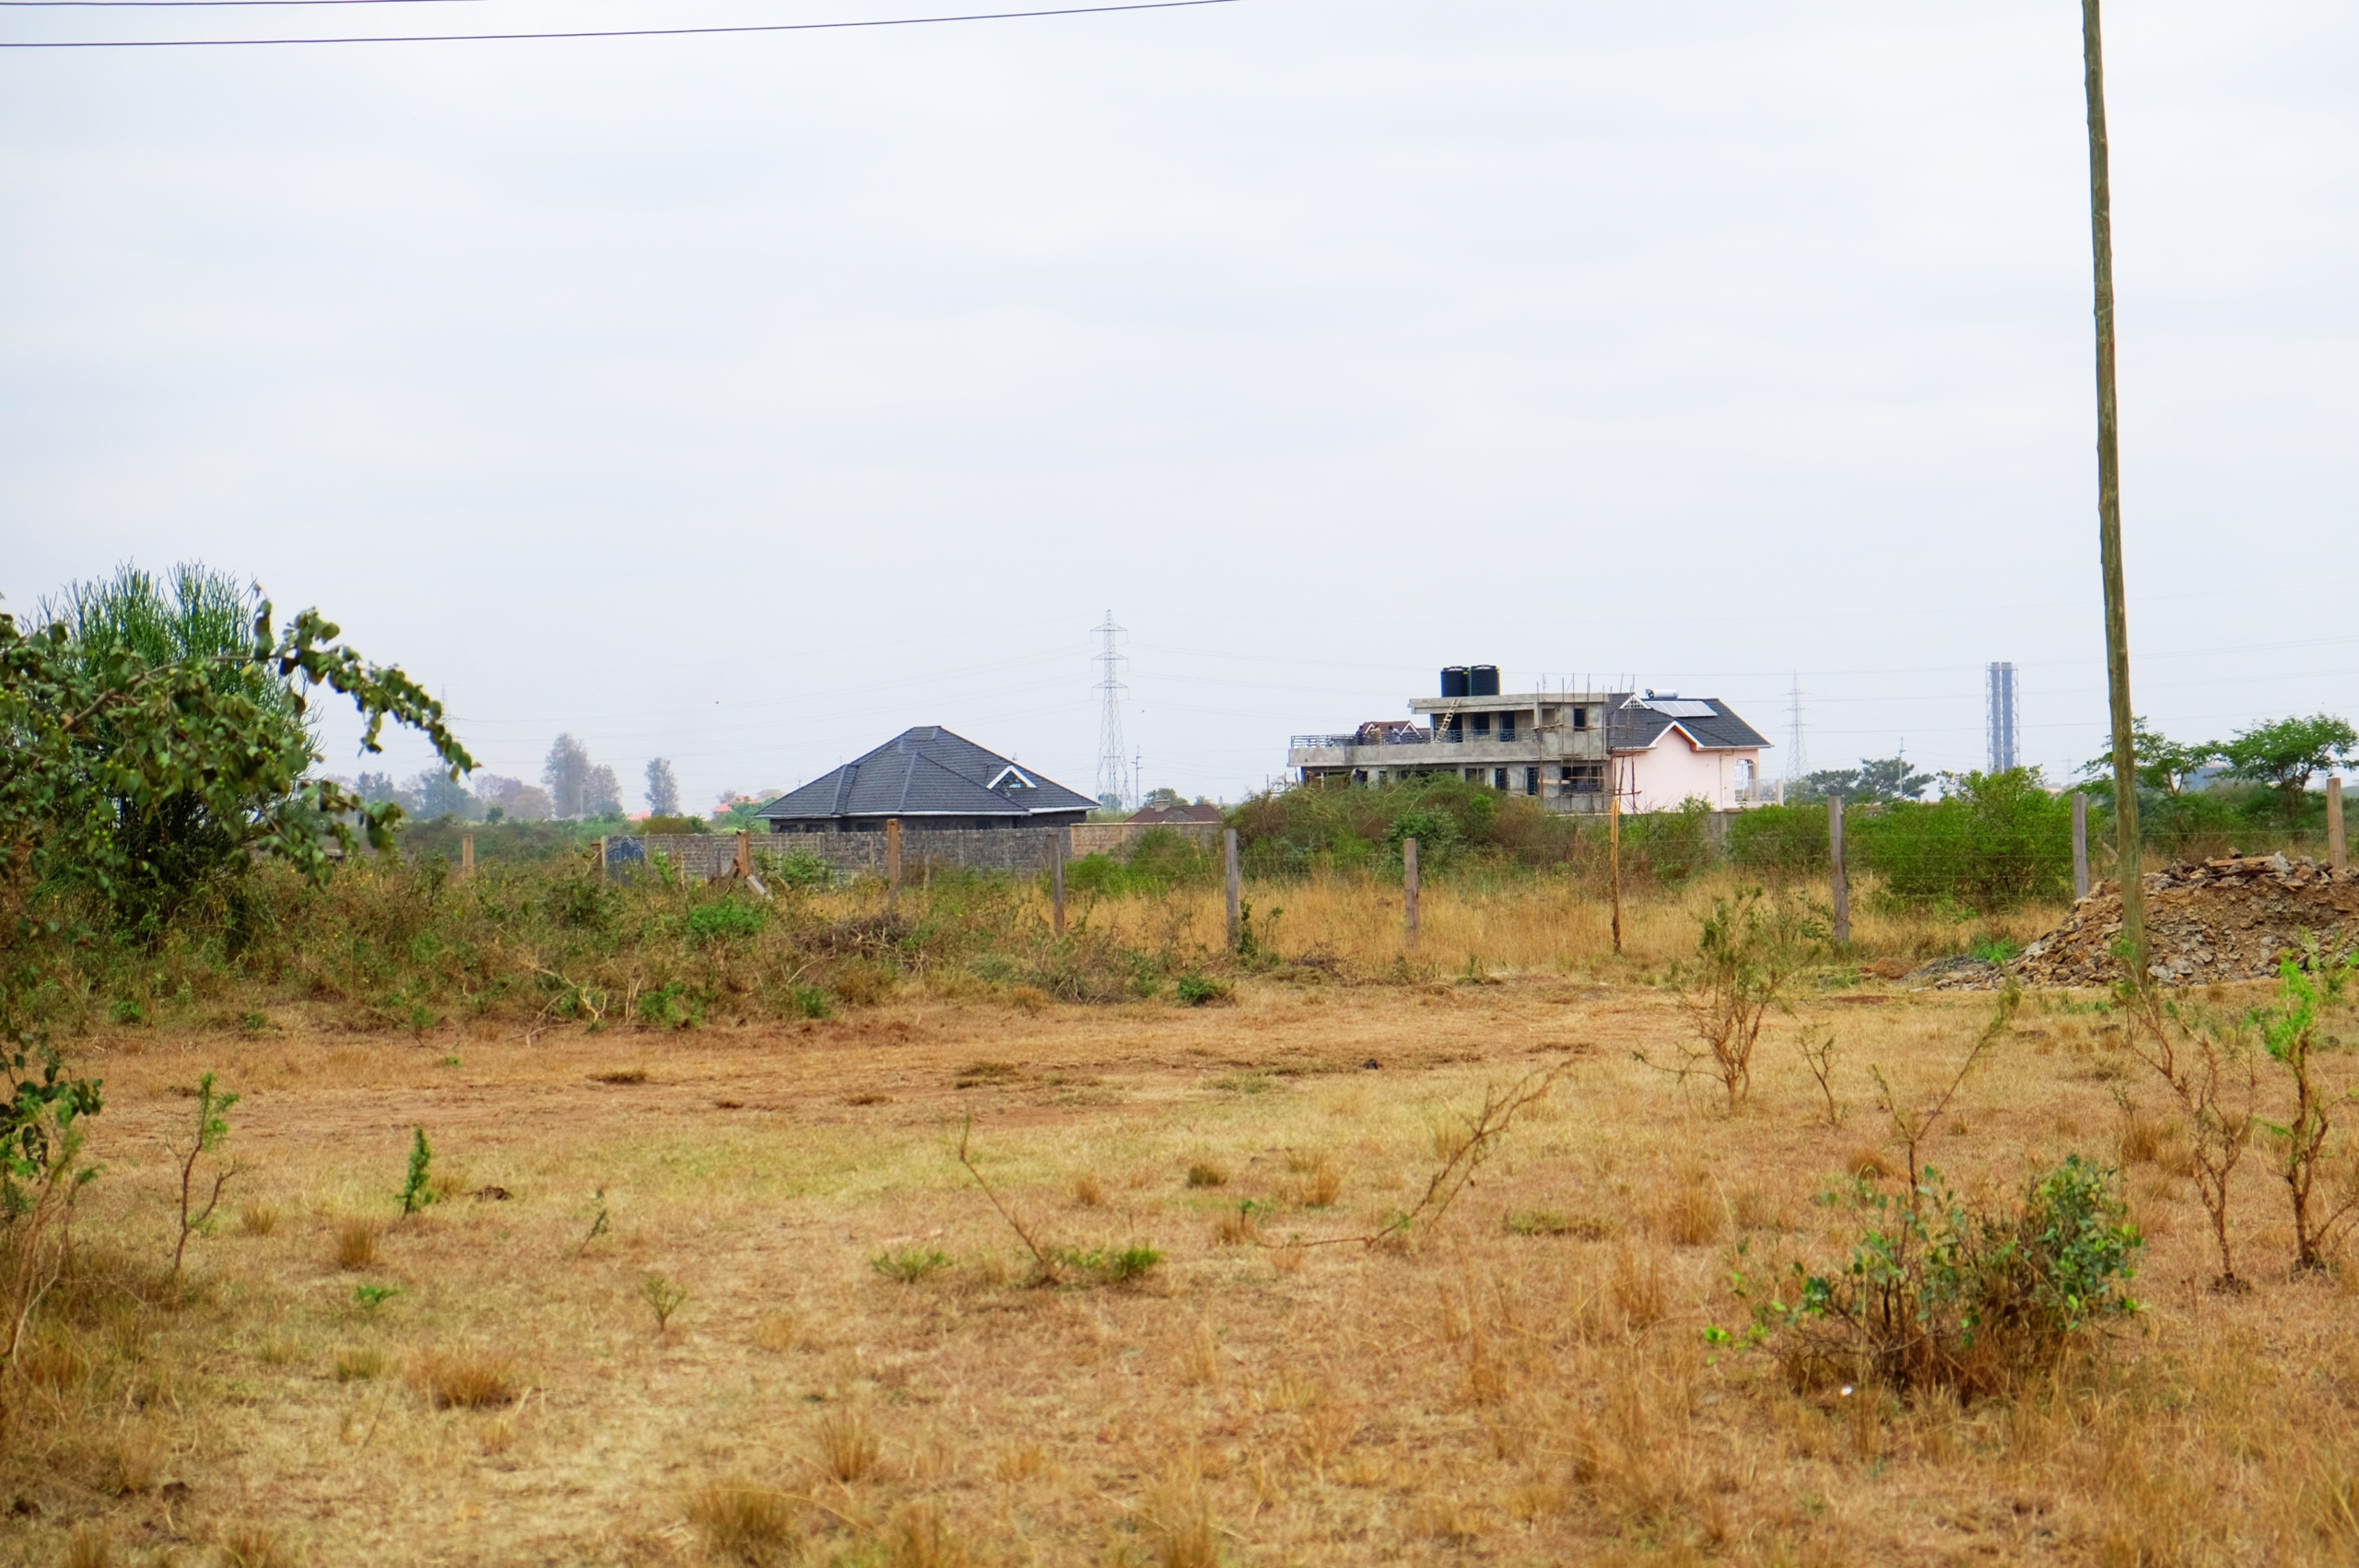 50 by 100 Ngoingwa-Tola Residential Plots